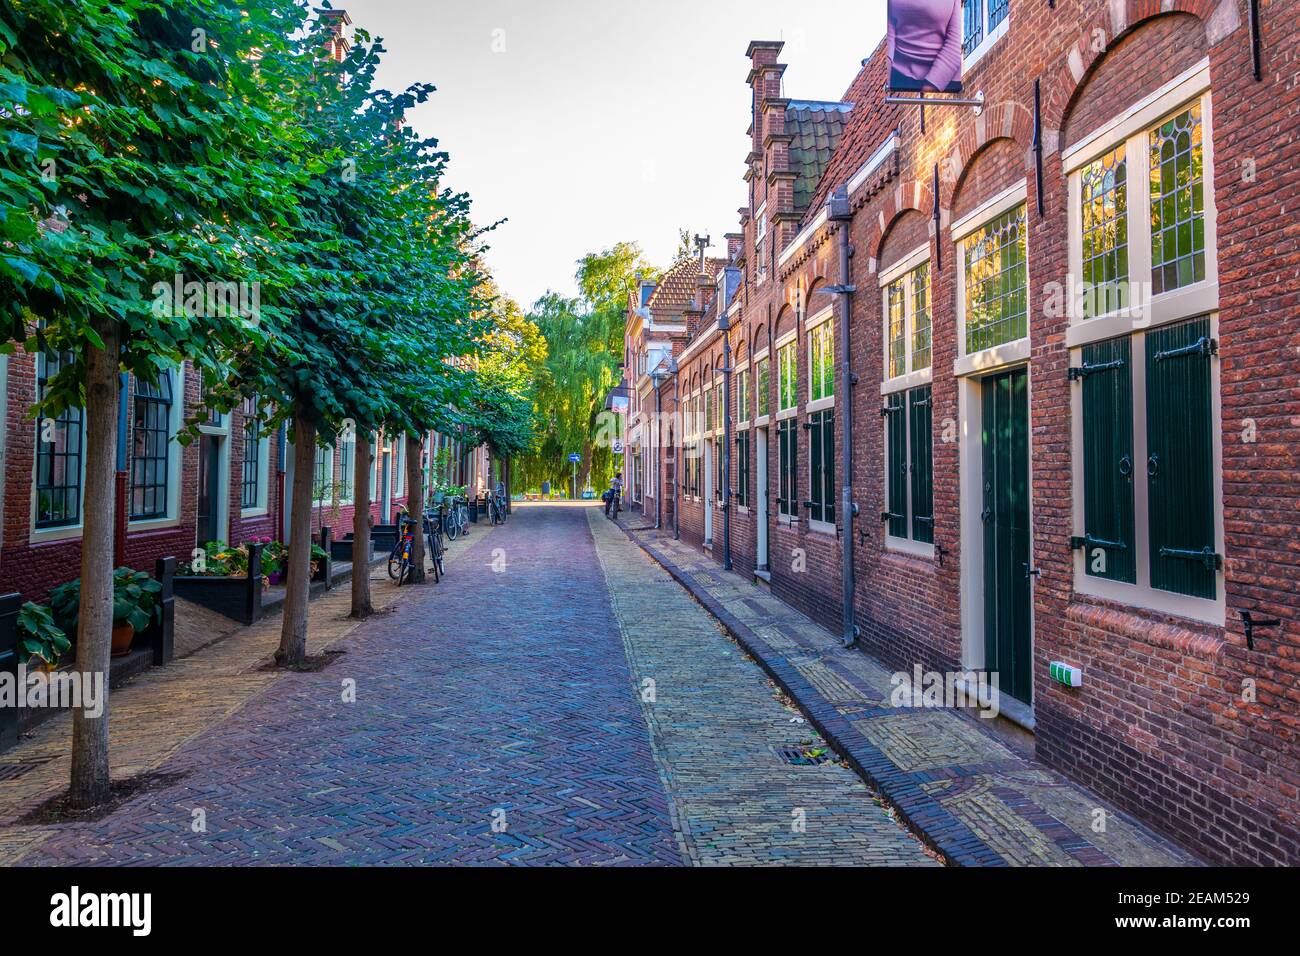 Frank Hals museum in the center of Haarlem, Netherlands Stock Photo